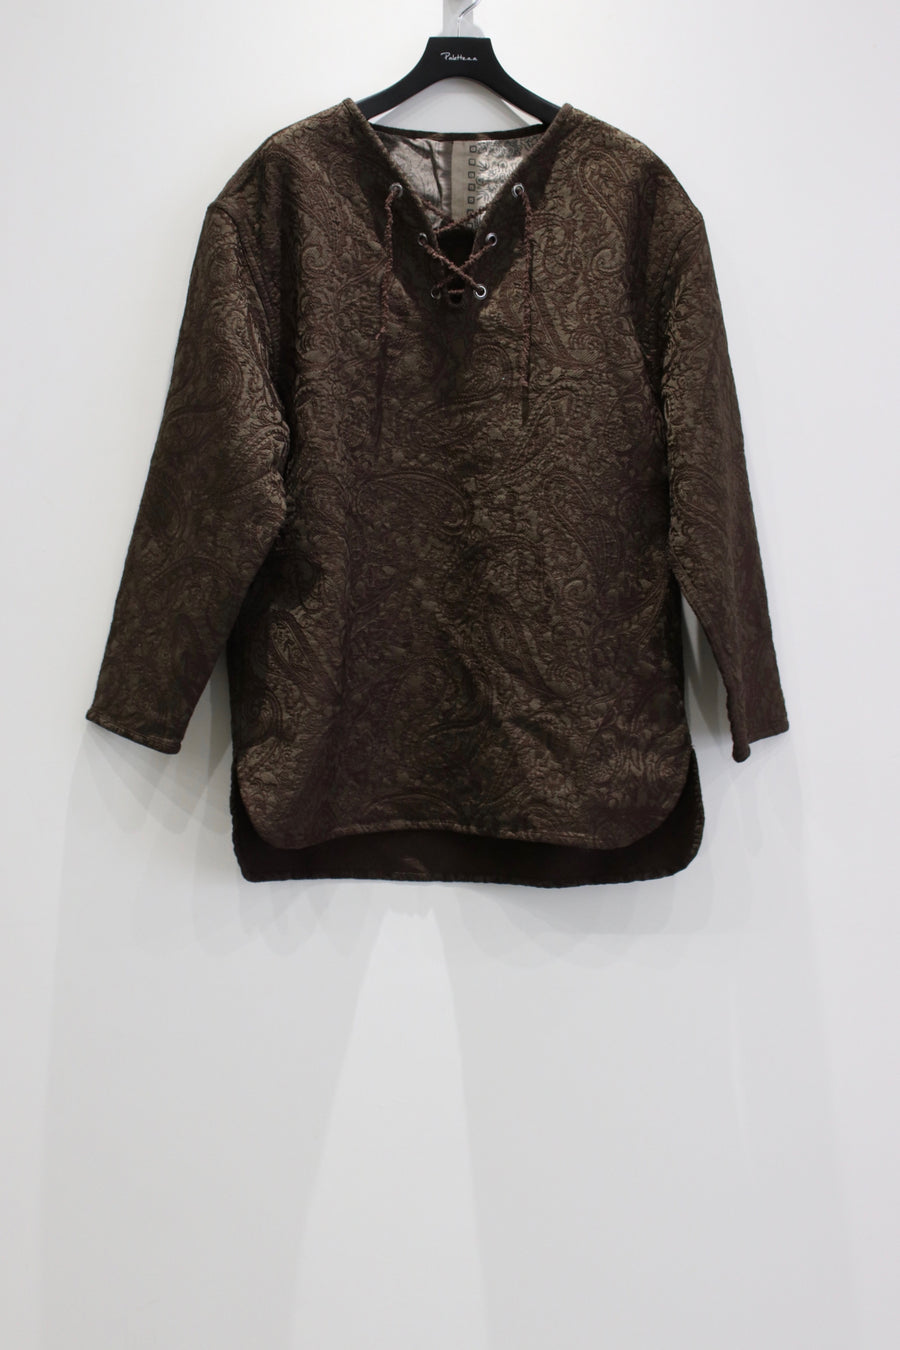 Children of the discordance  LACEUP PULLOVER OVERDYE